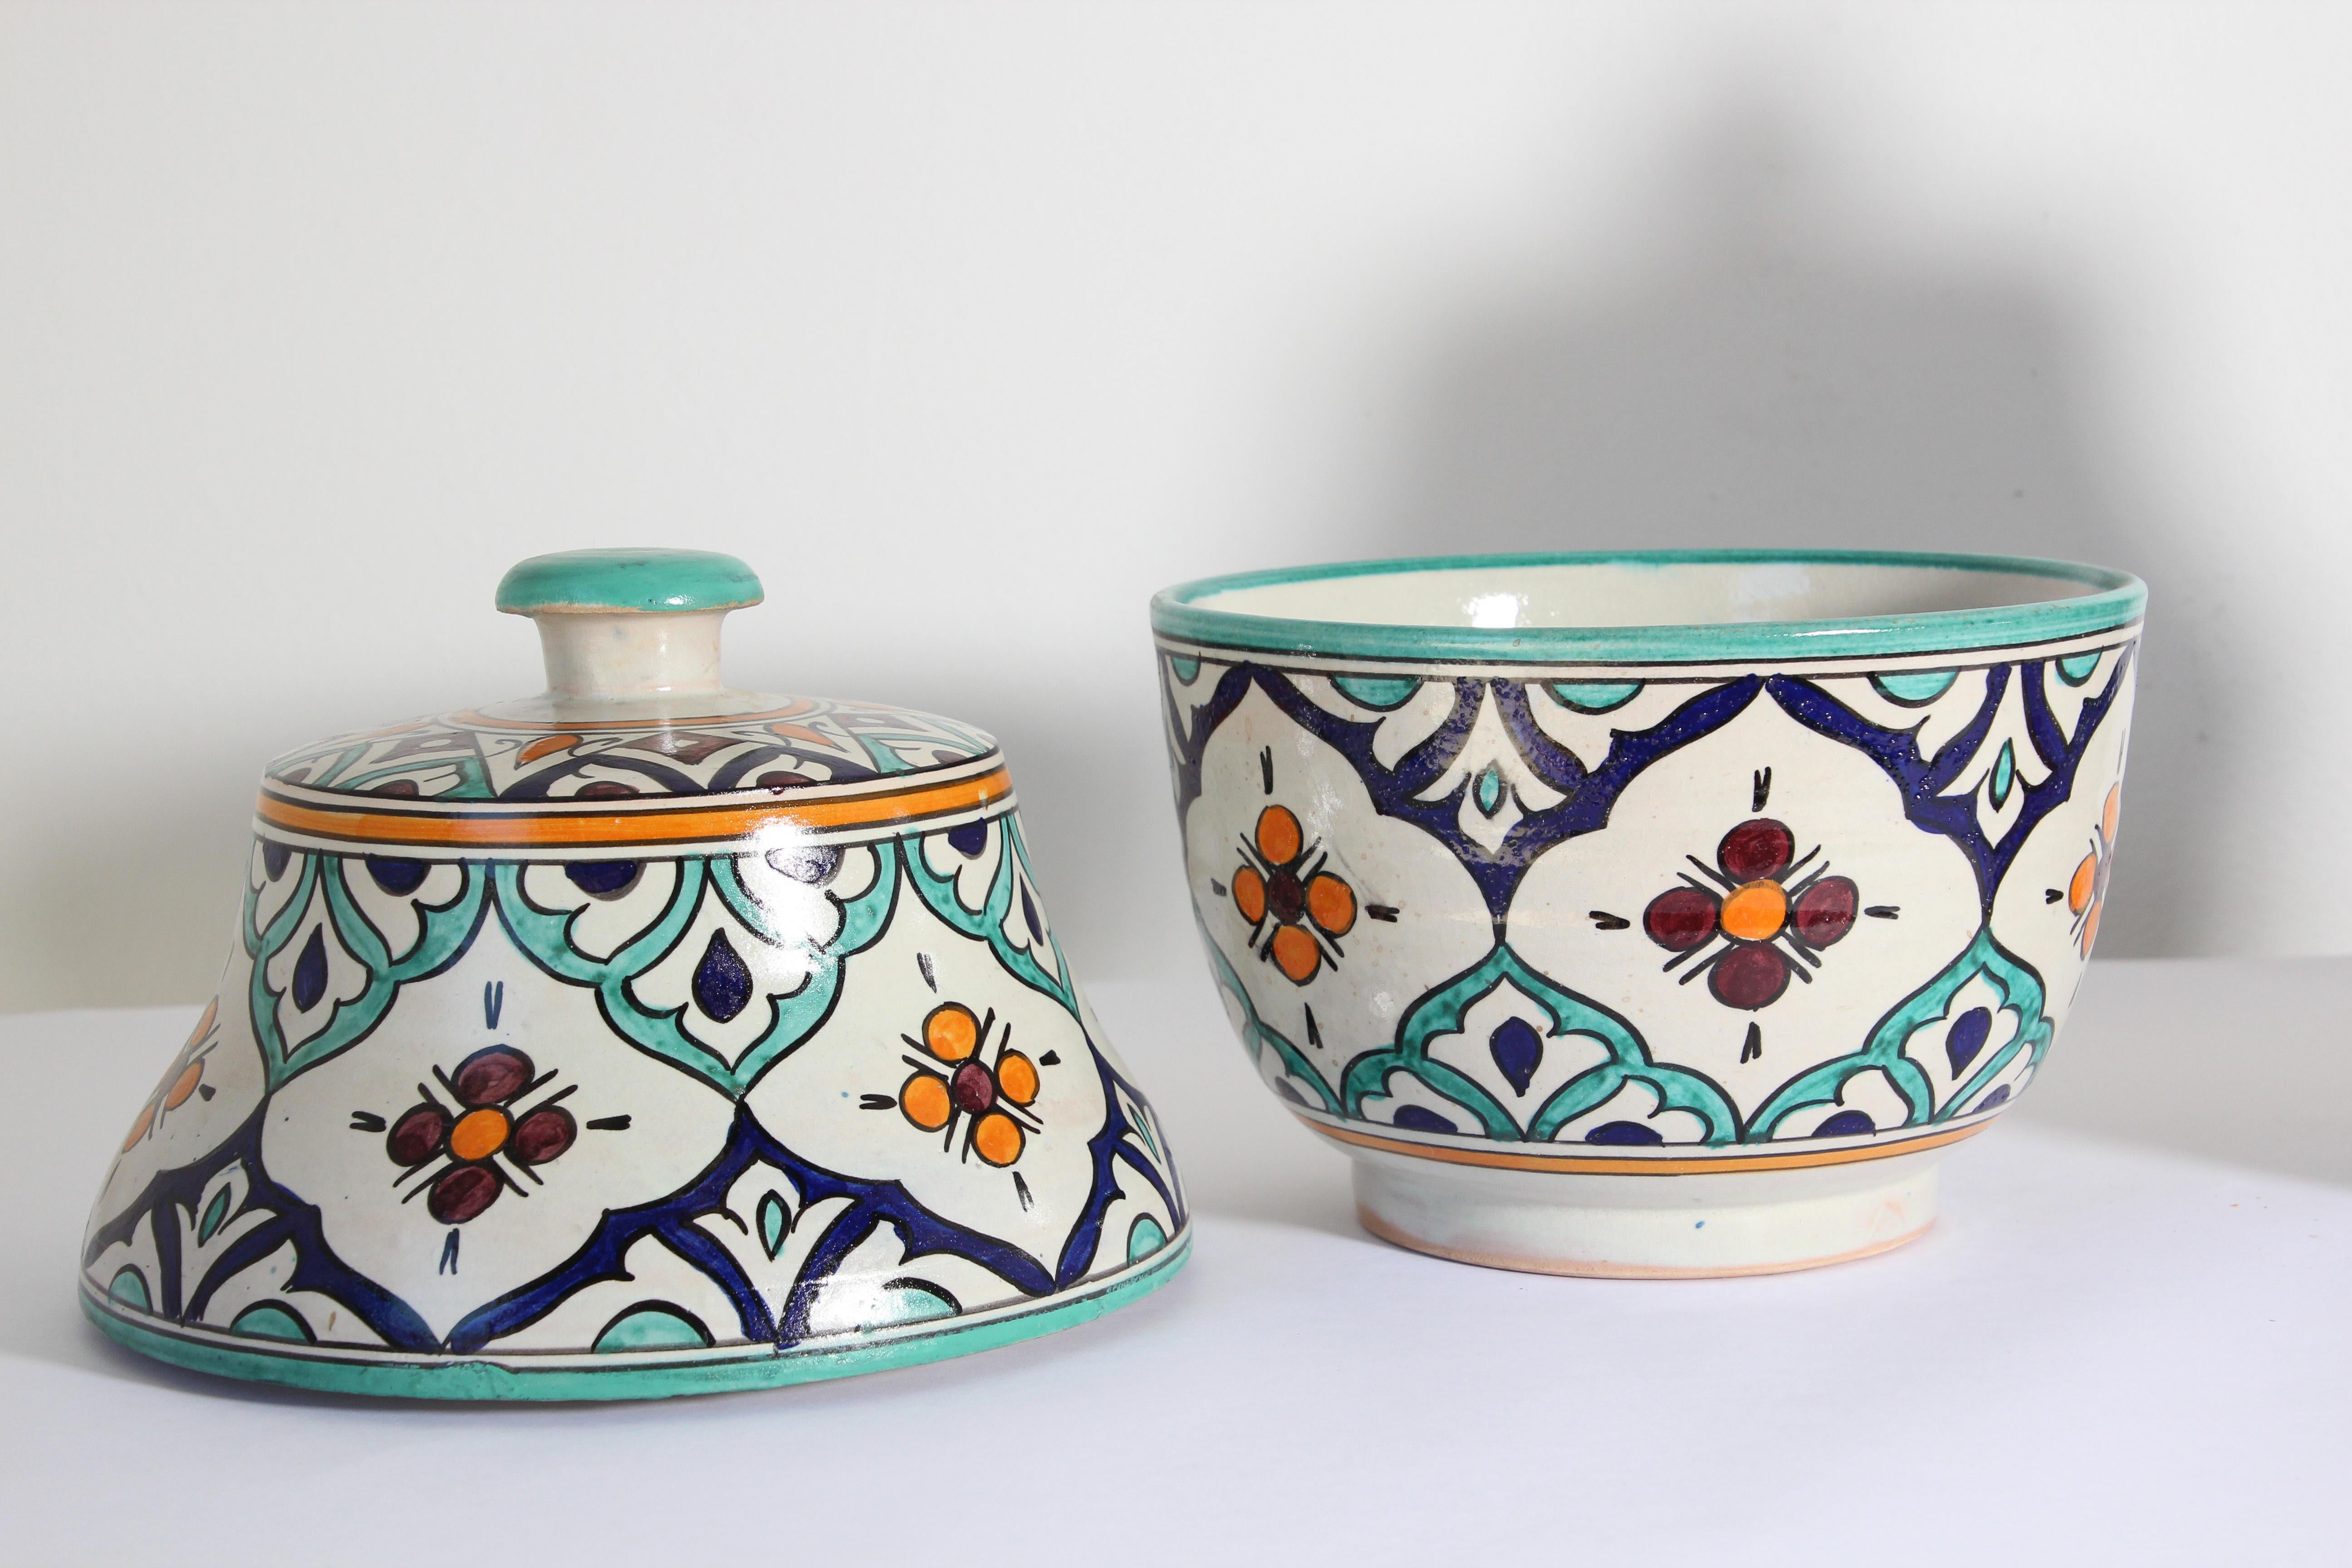 Moorish Ceramic Glazed Covered Urns Handcrafted in Fez Morocco For Sale 10